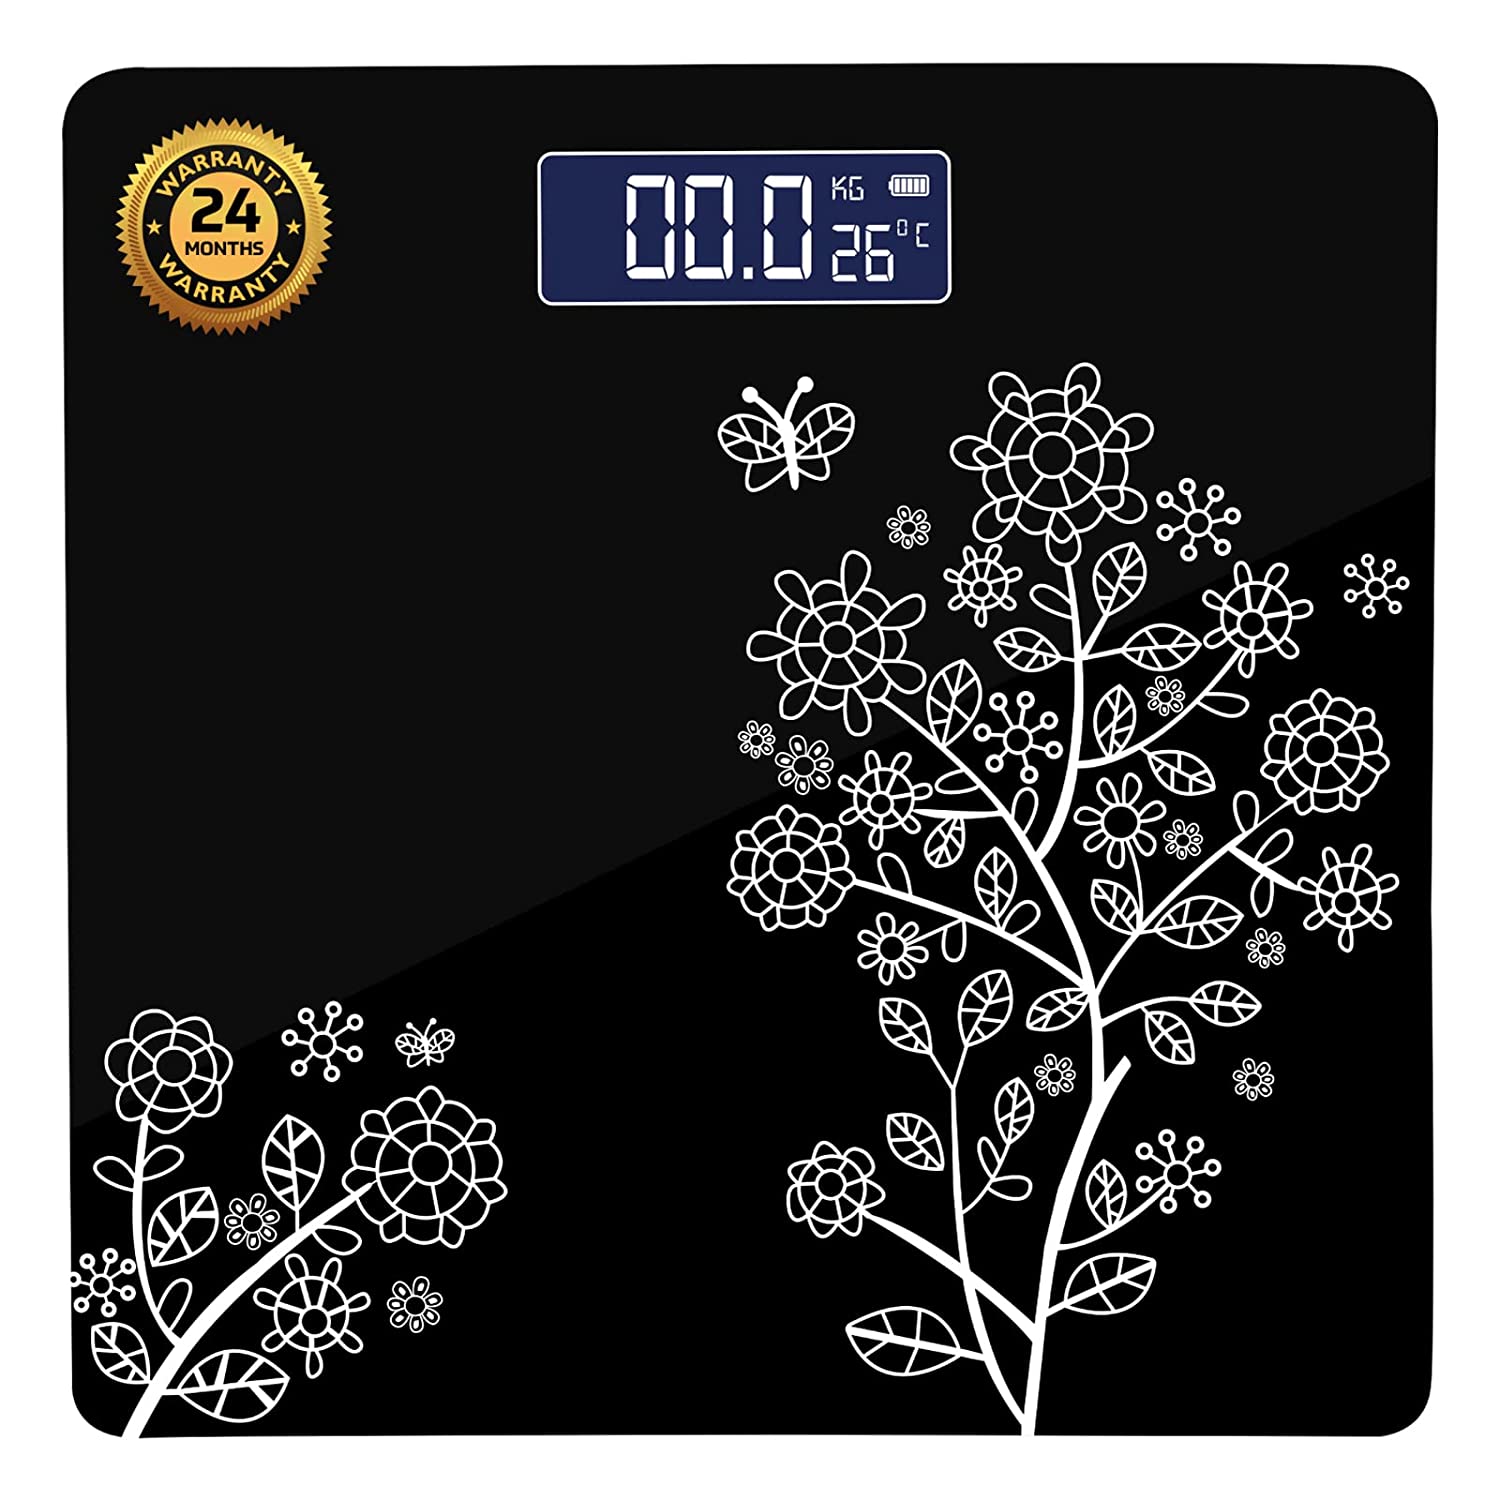 beatXP Floral Digital Bathroom Weighing Scale with LCD Panel & Thick Tempered Glass